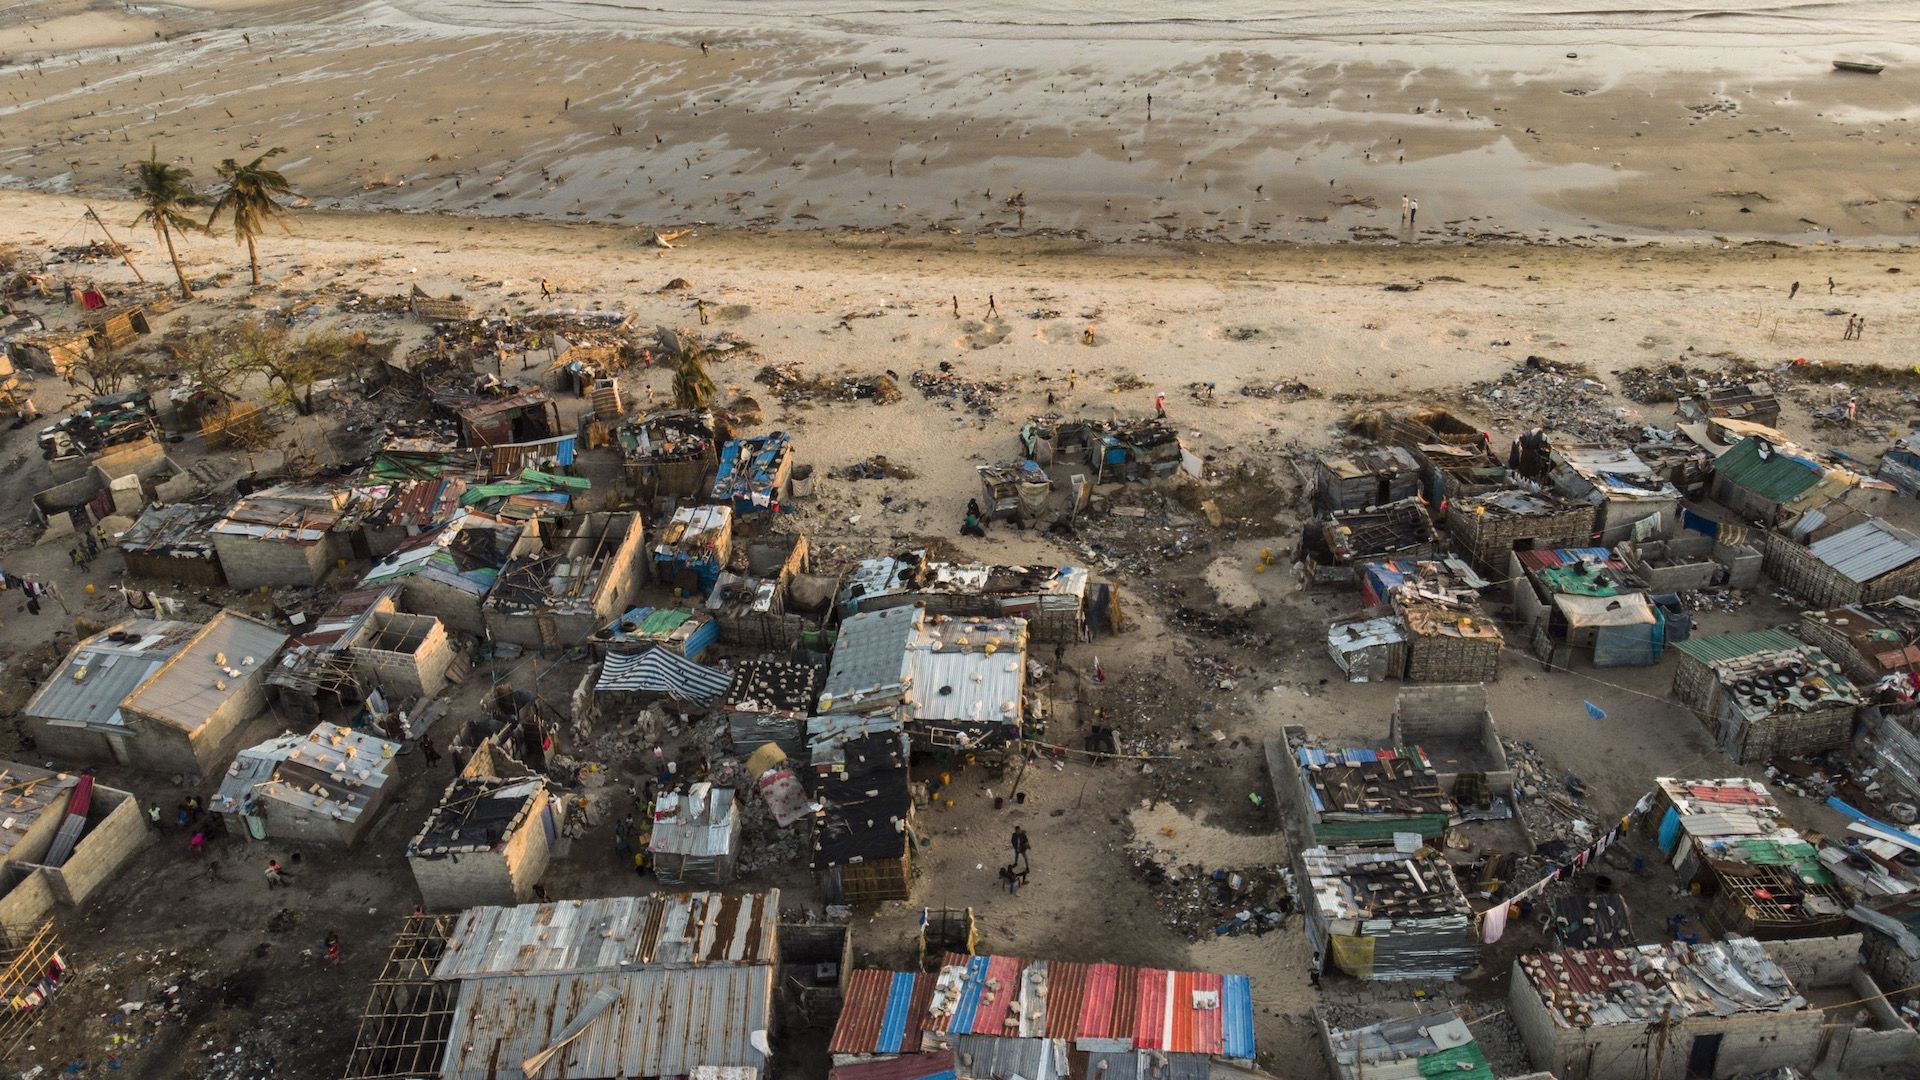 Debris and destroyed buildings which stood in the path of Cyclone Idai can be seen in this aerial photograph over the Praia Nova neighborhood of Beira, Mozambique.